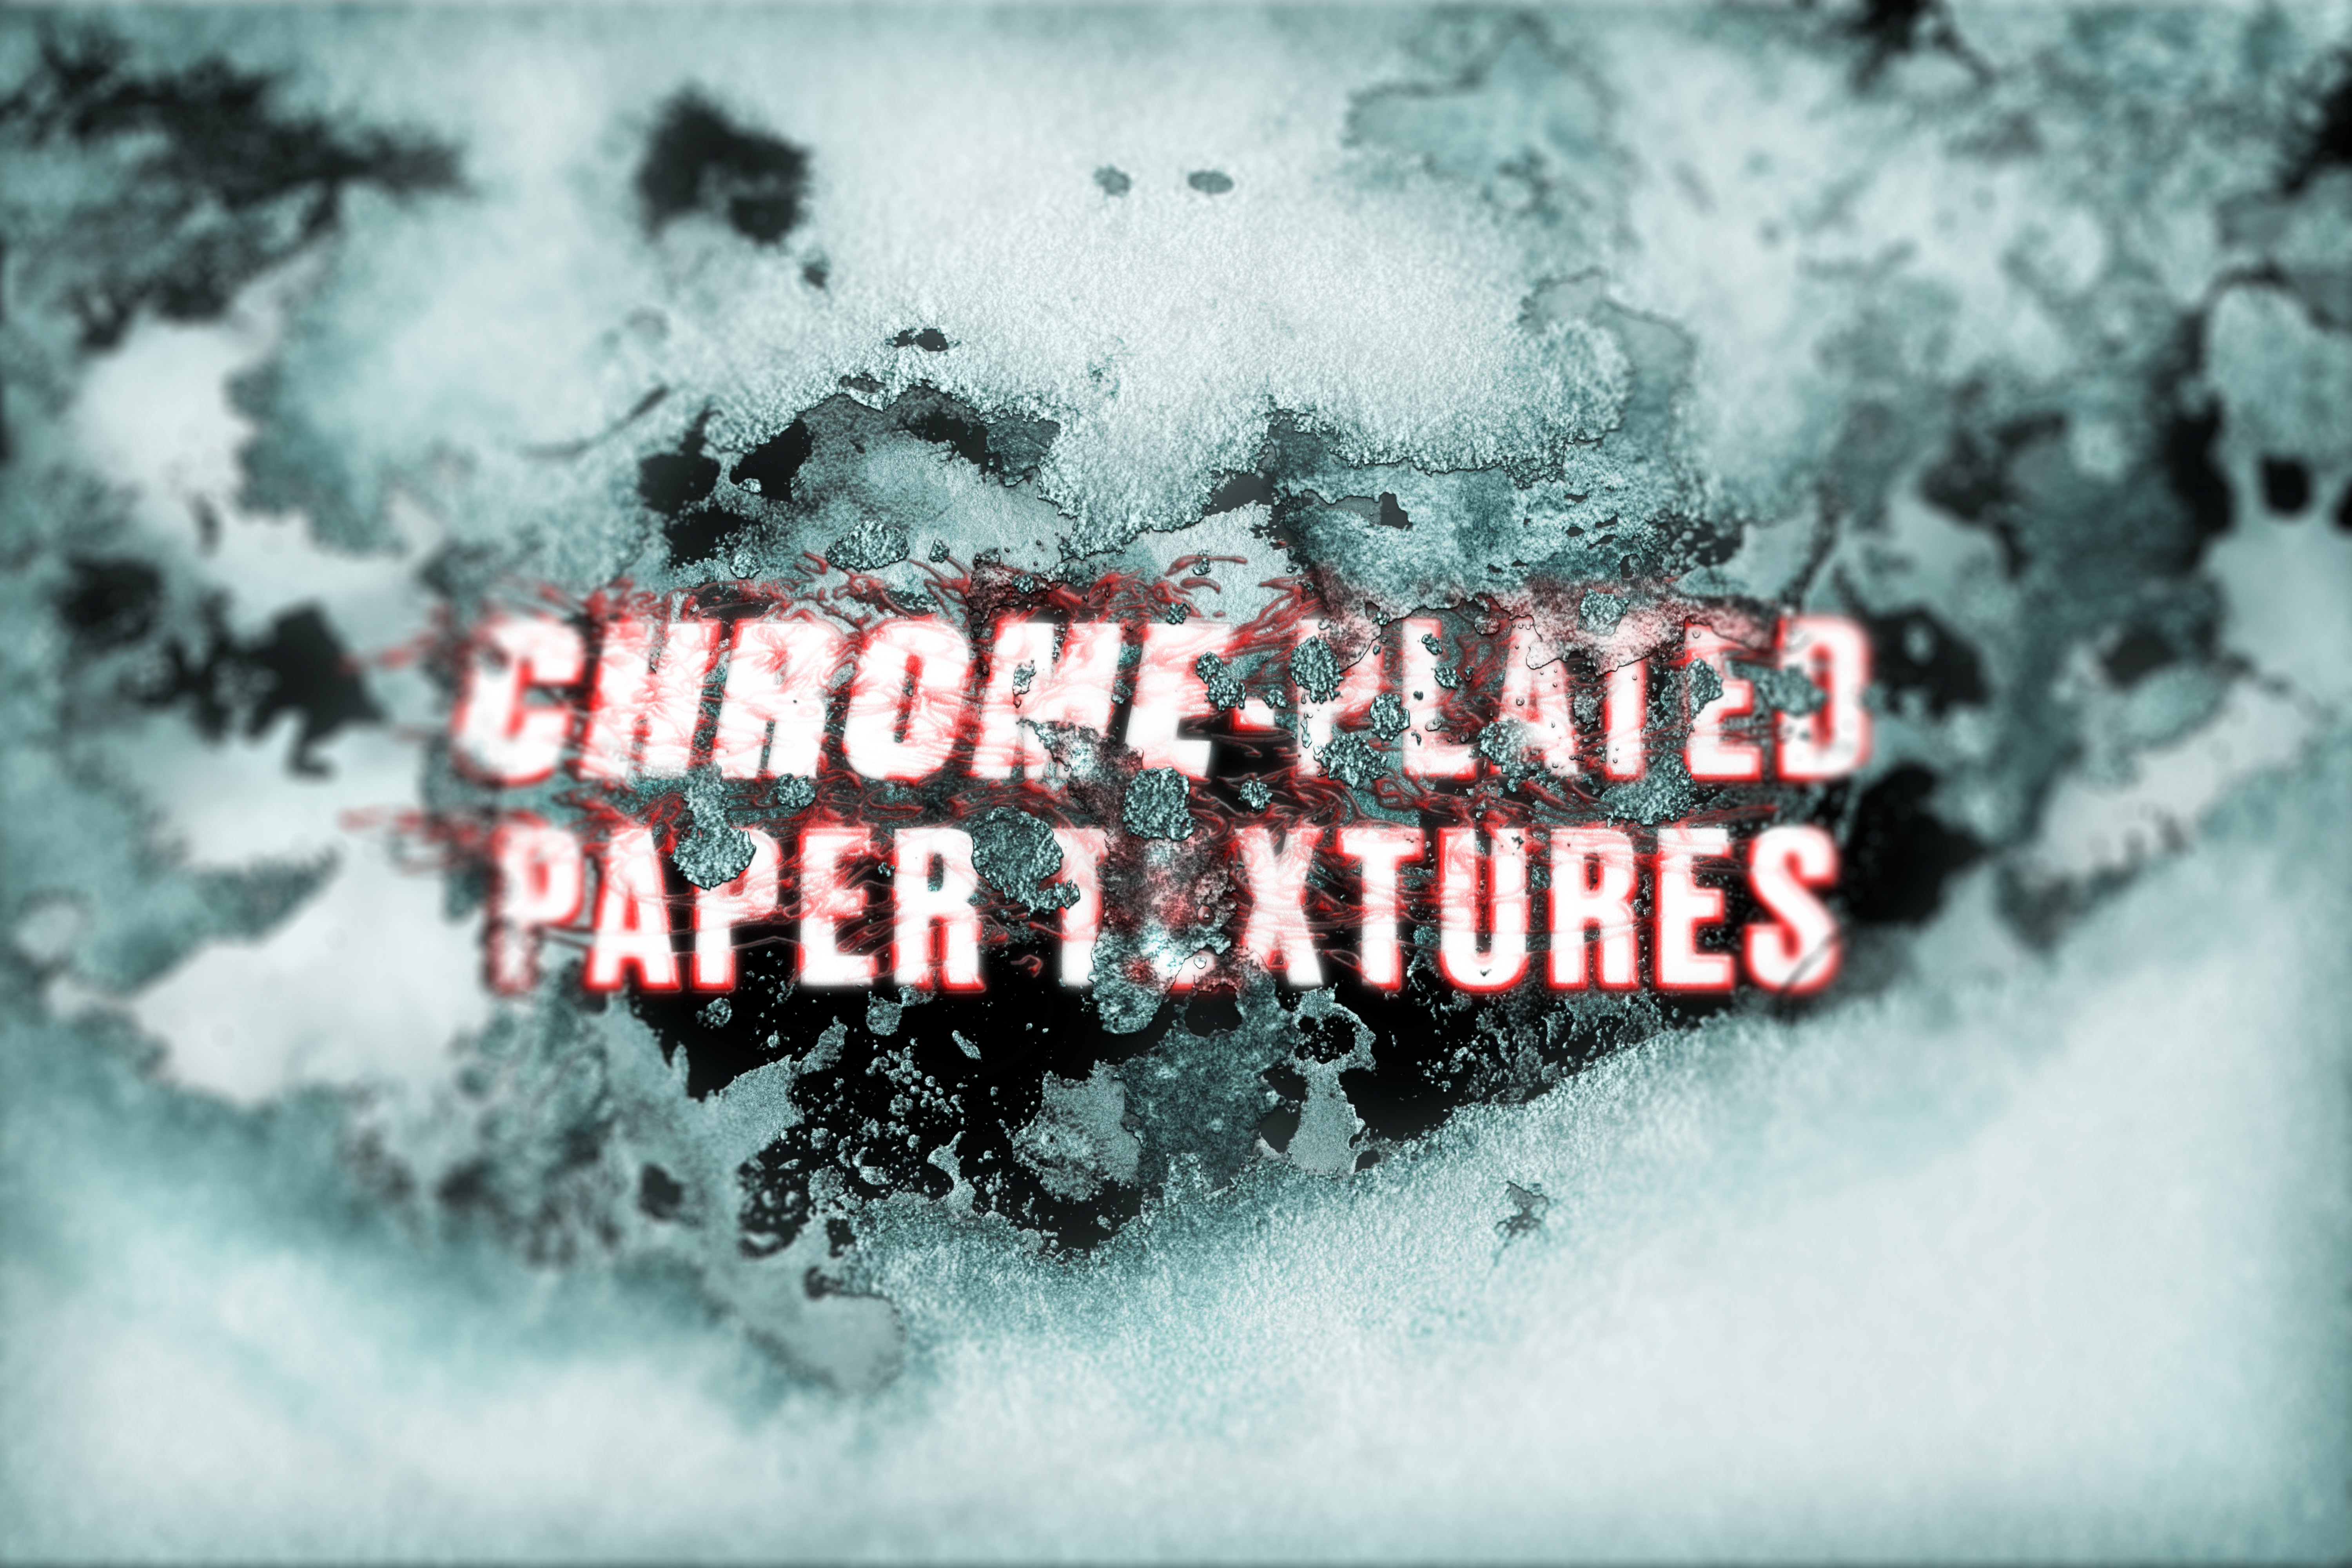 Chrome-plated paper textures rendition image